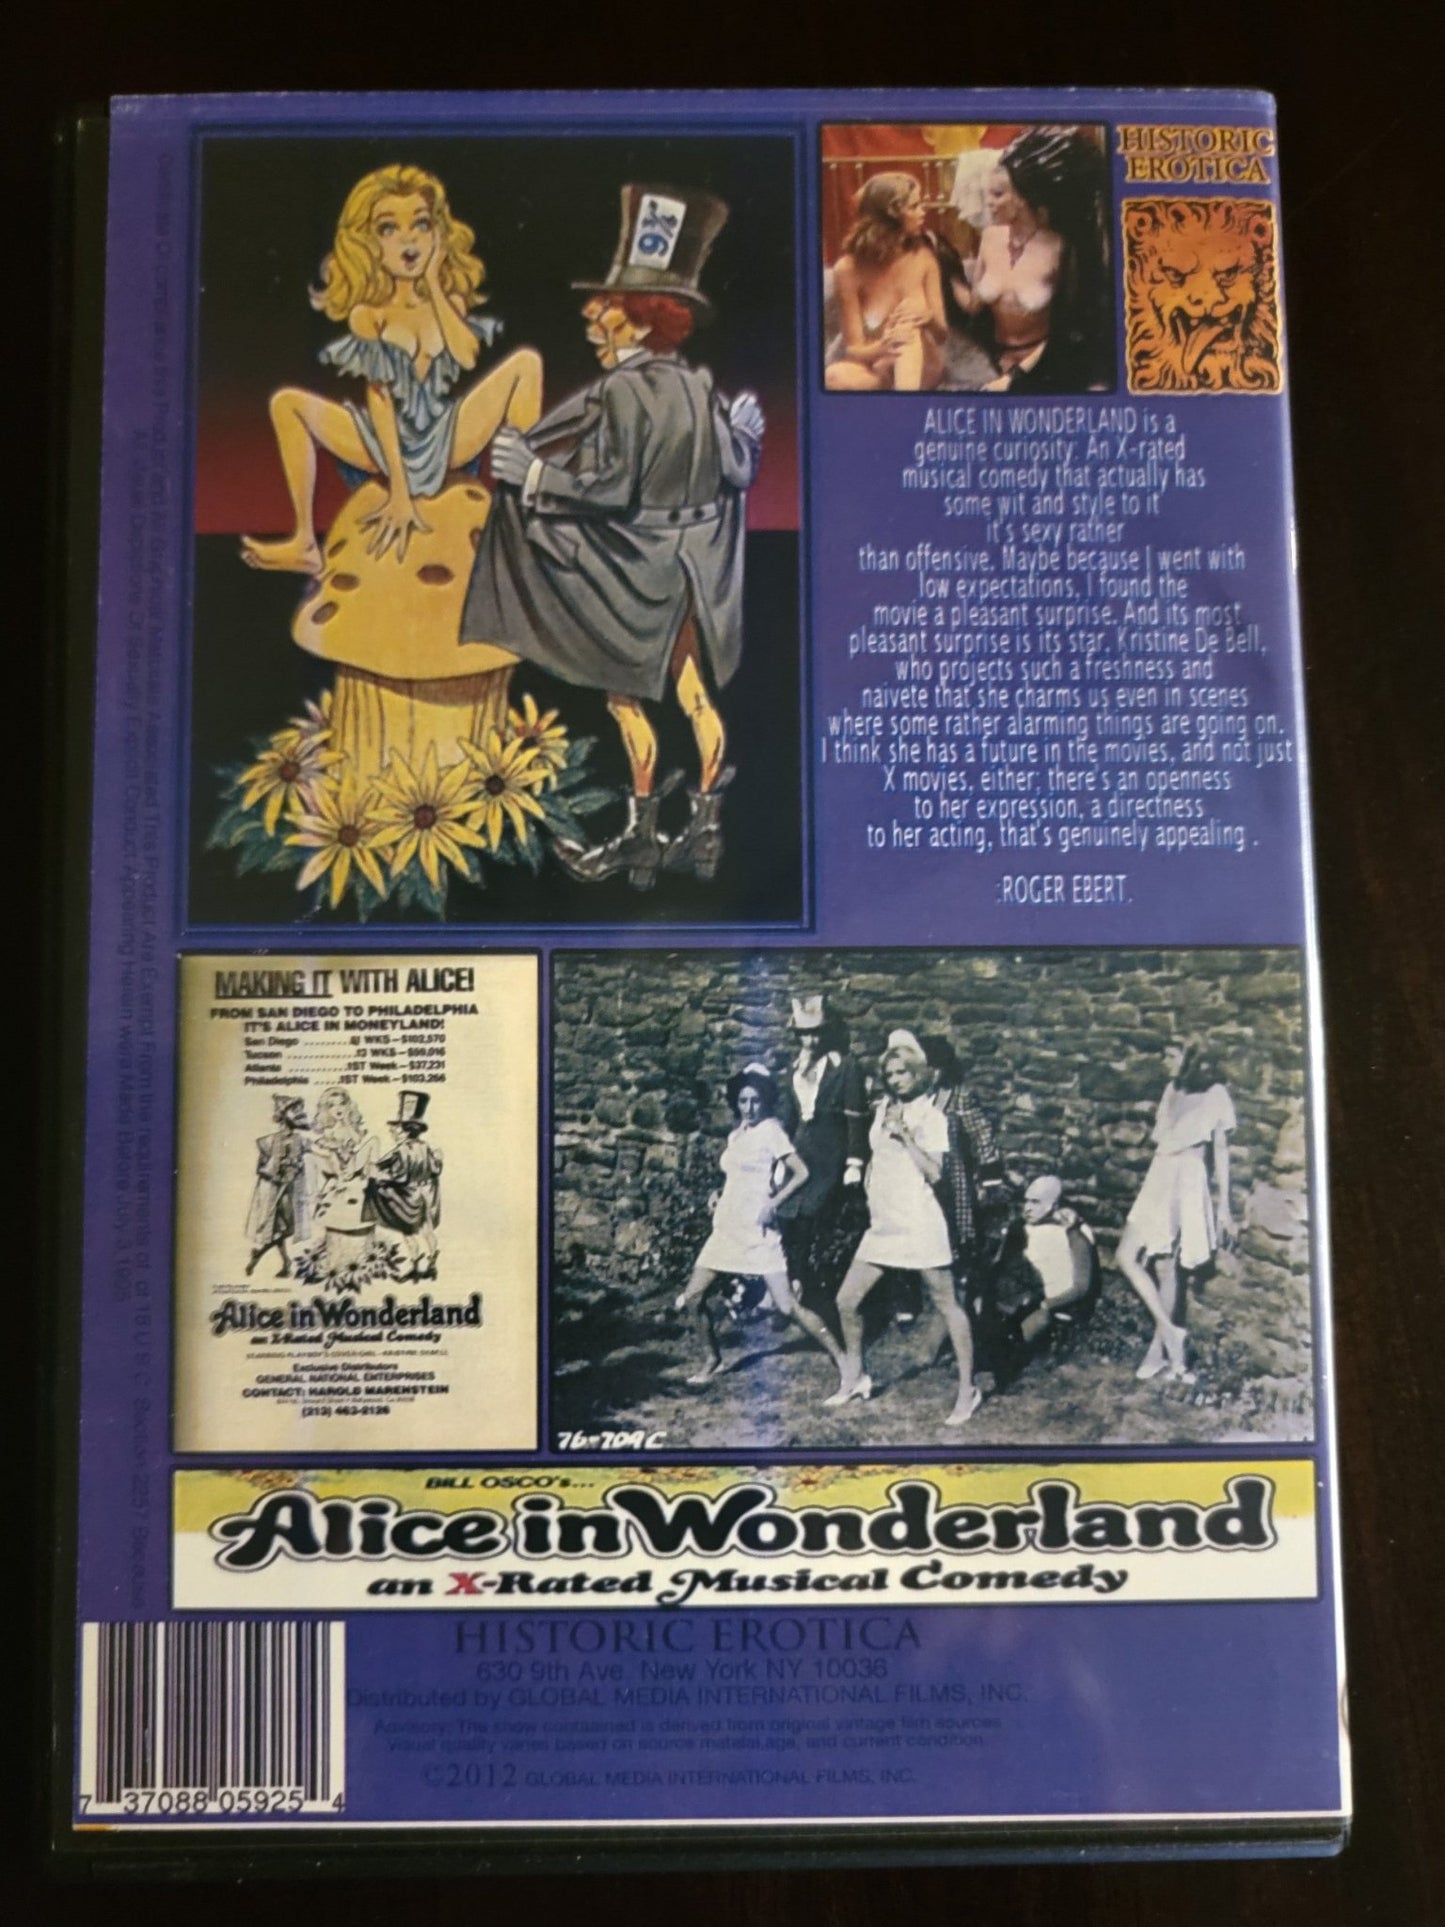 Historic Erotica - Alice in Wonderland | DVD | An X Rated Musical Comedy - NOT For Kids - DVD - Steady Bunny Shop